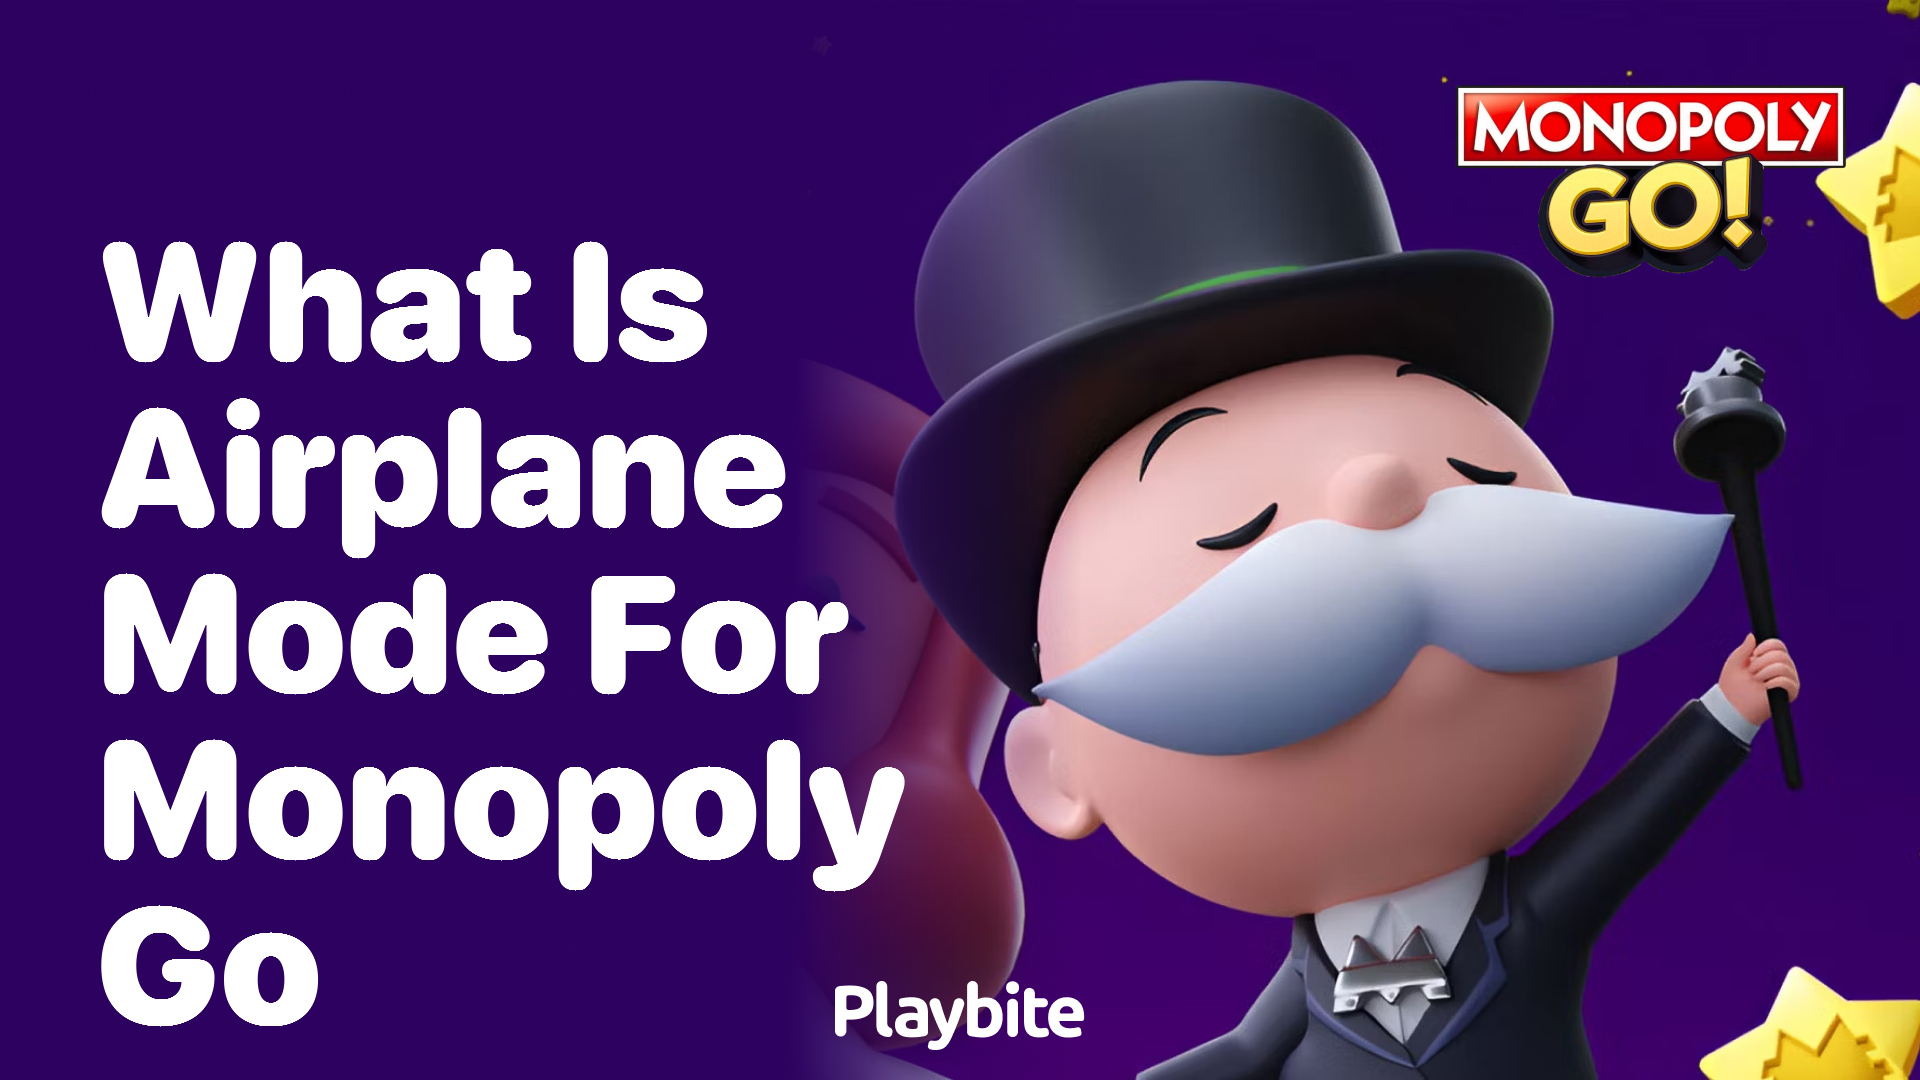 What is Airplane Mode for Monopoly Go?